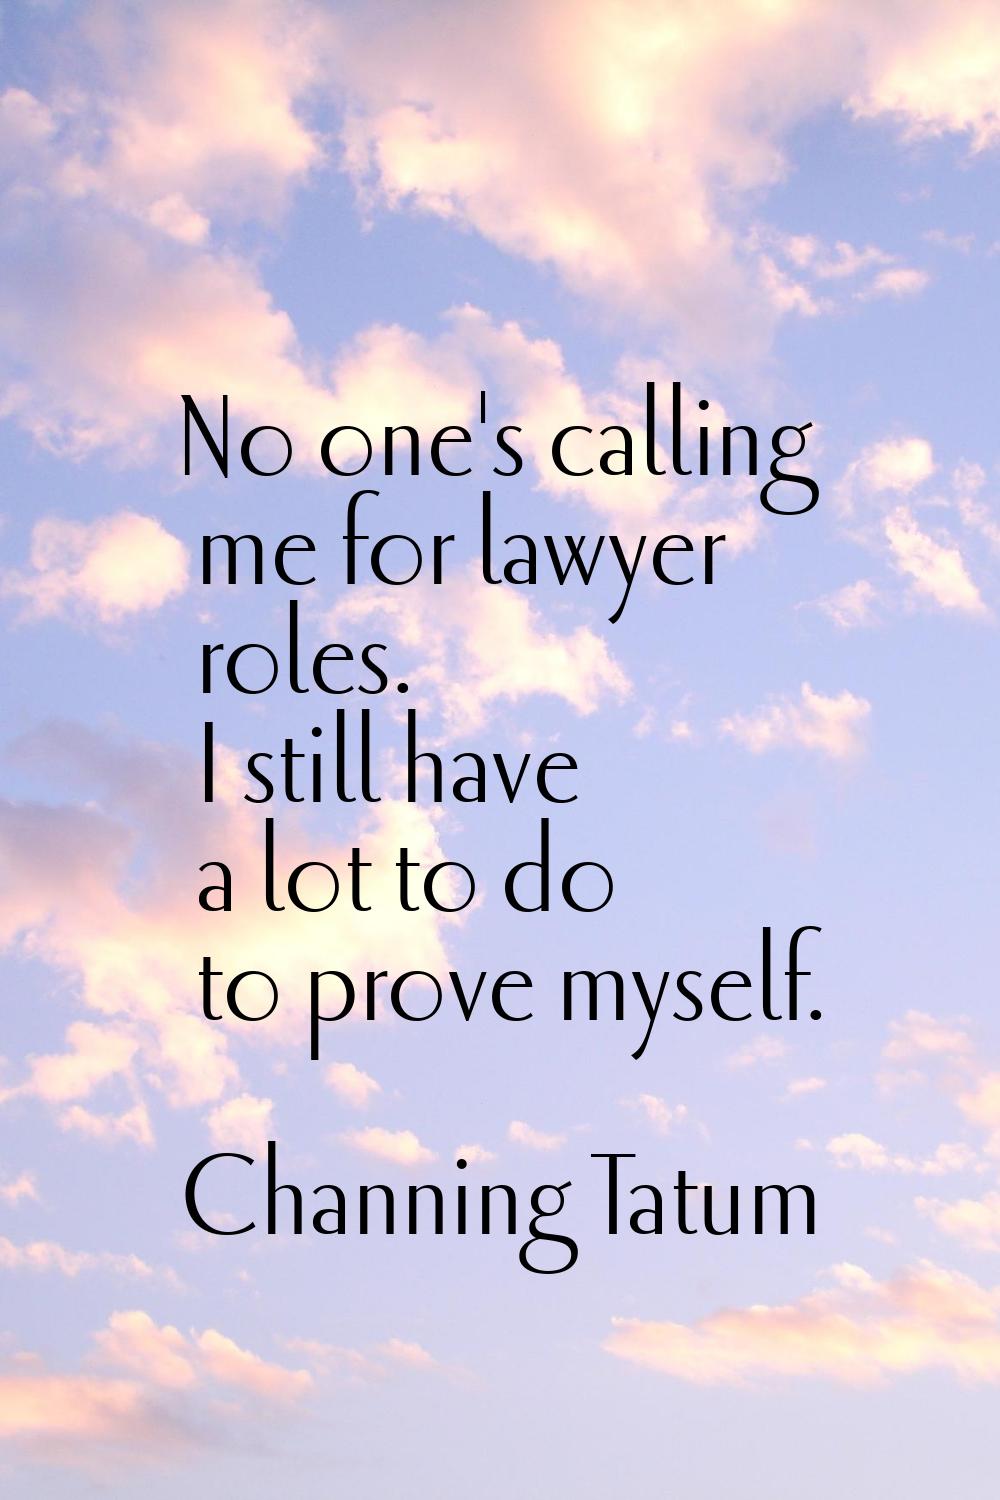 No one's calling me for lawyer roles. I still have a lot to do to prove myself.